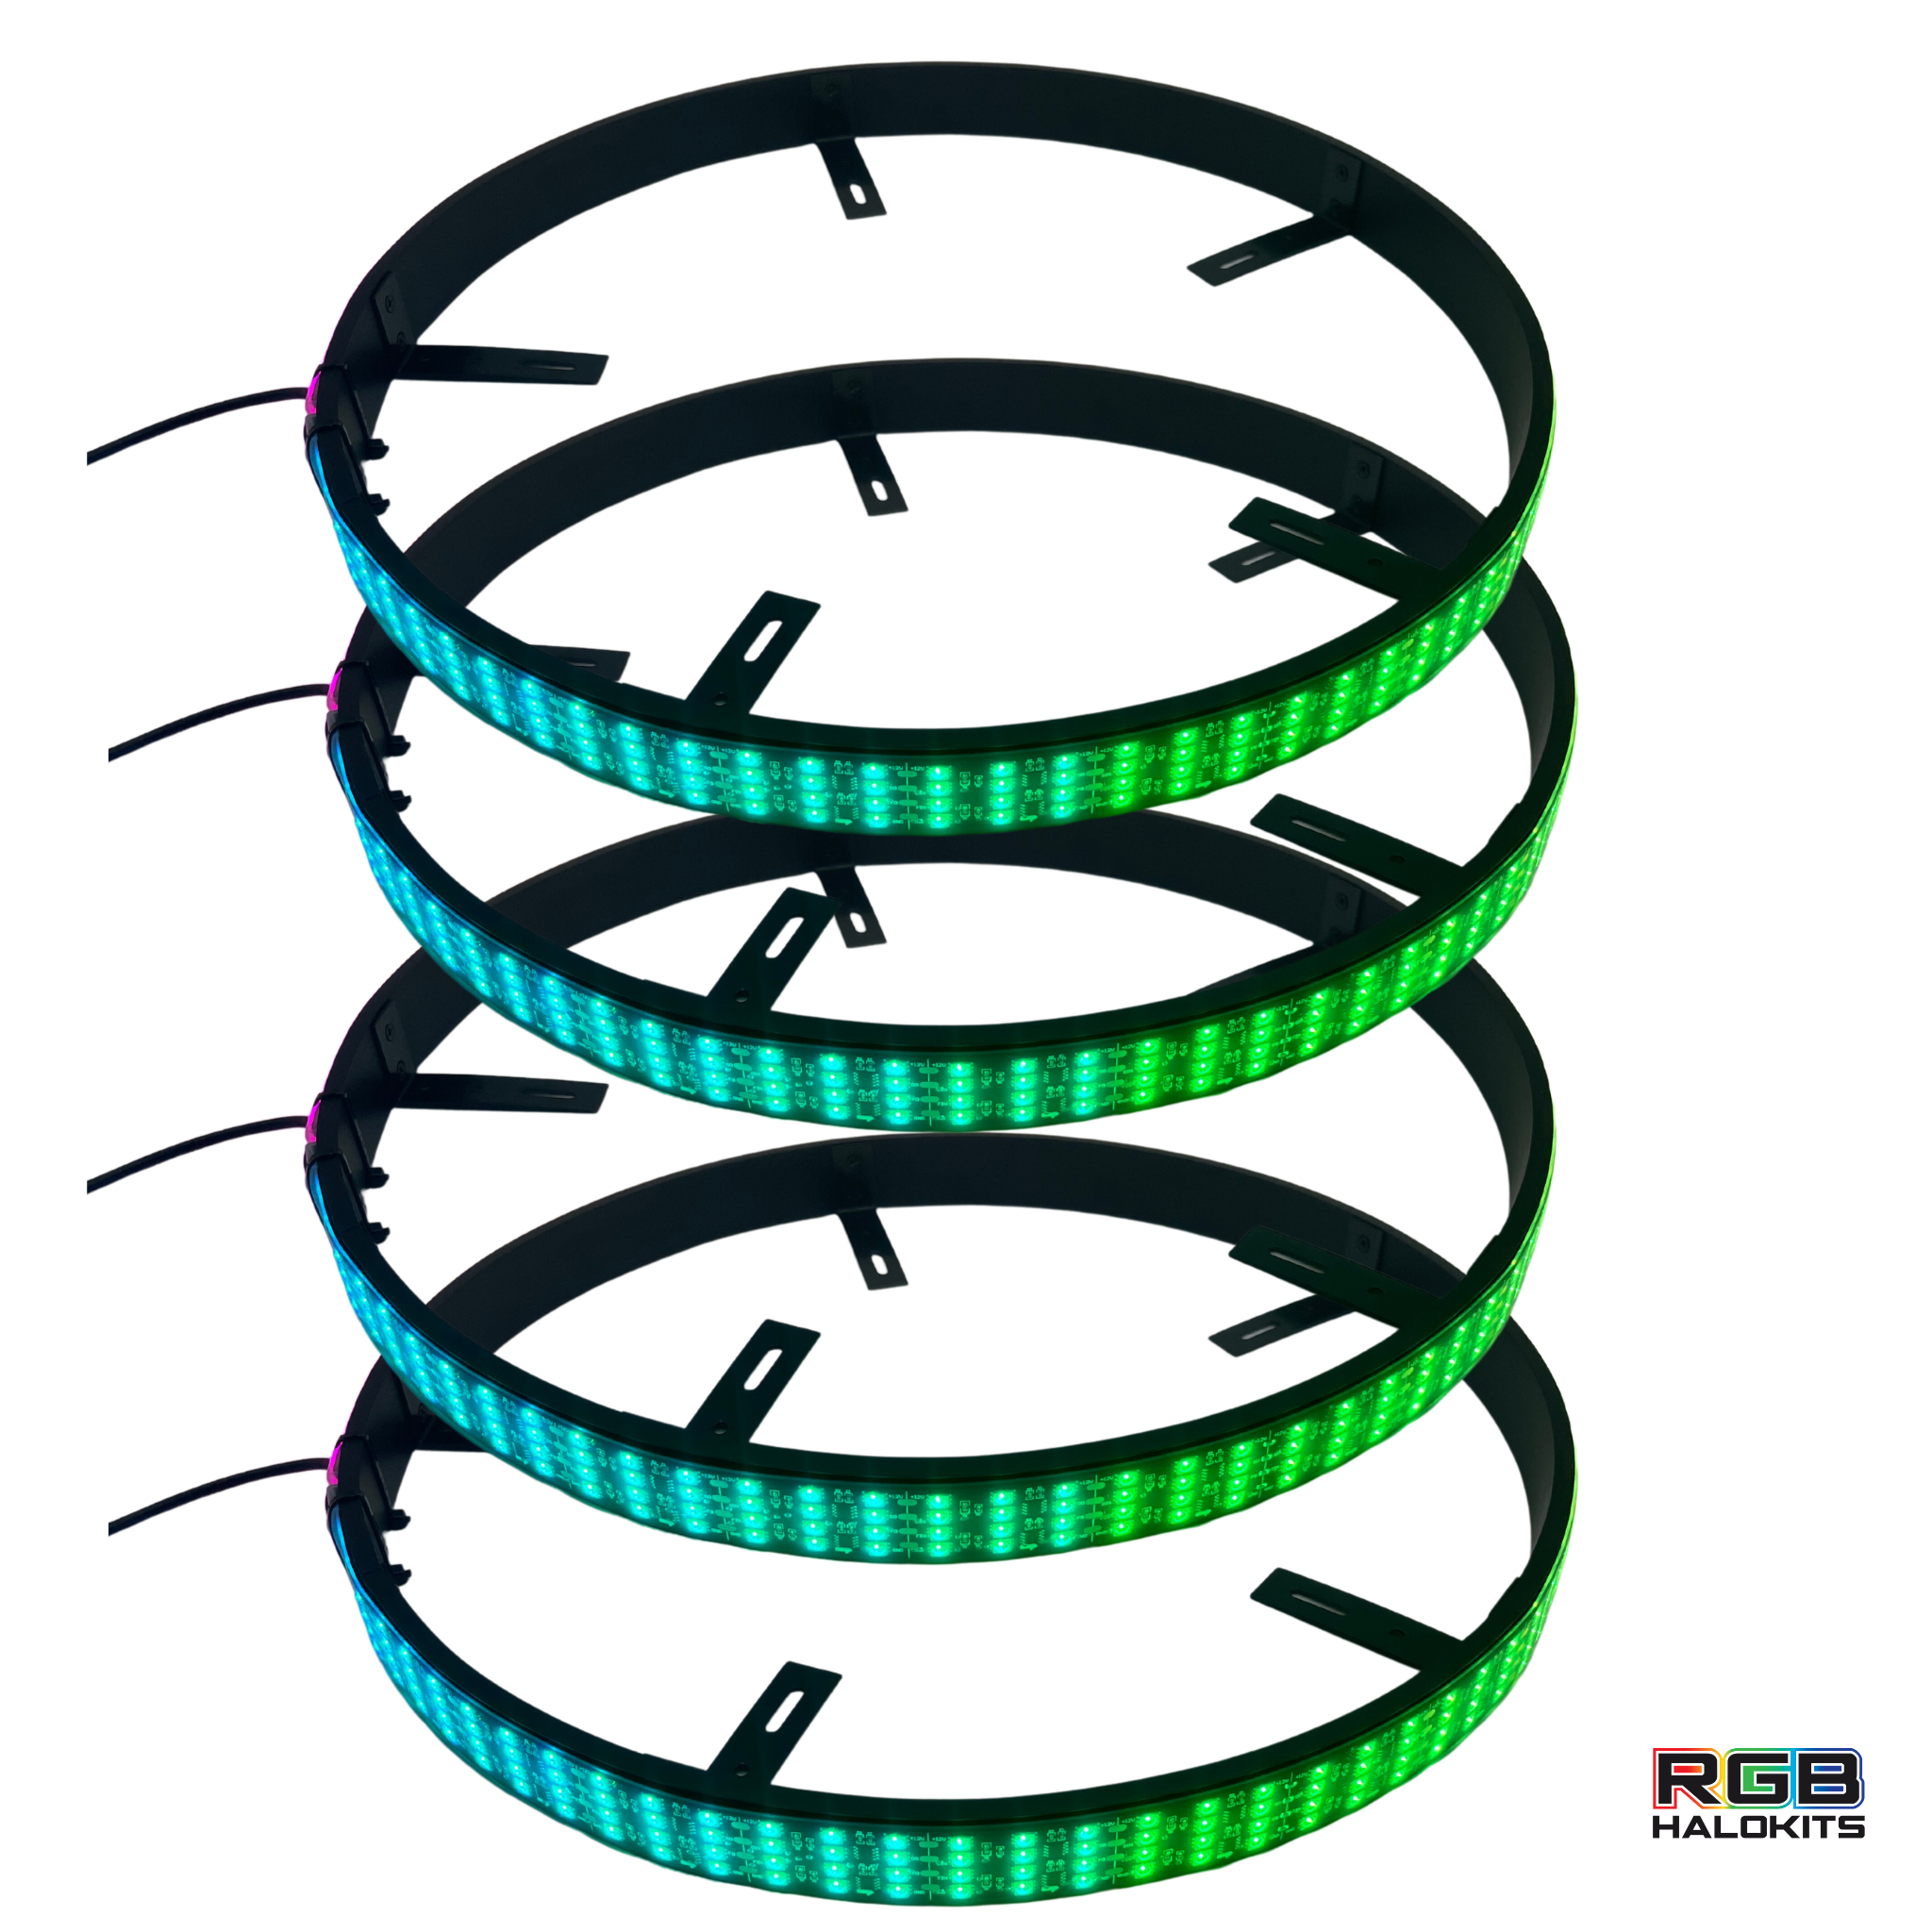 Quad 4 Row LED Wheel Ring (Replacements)